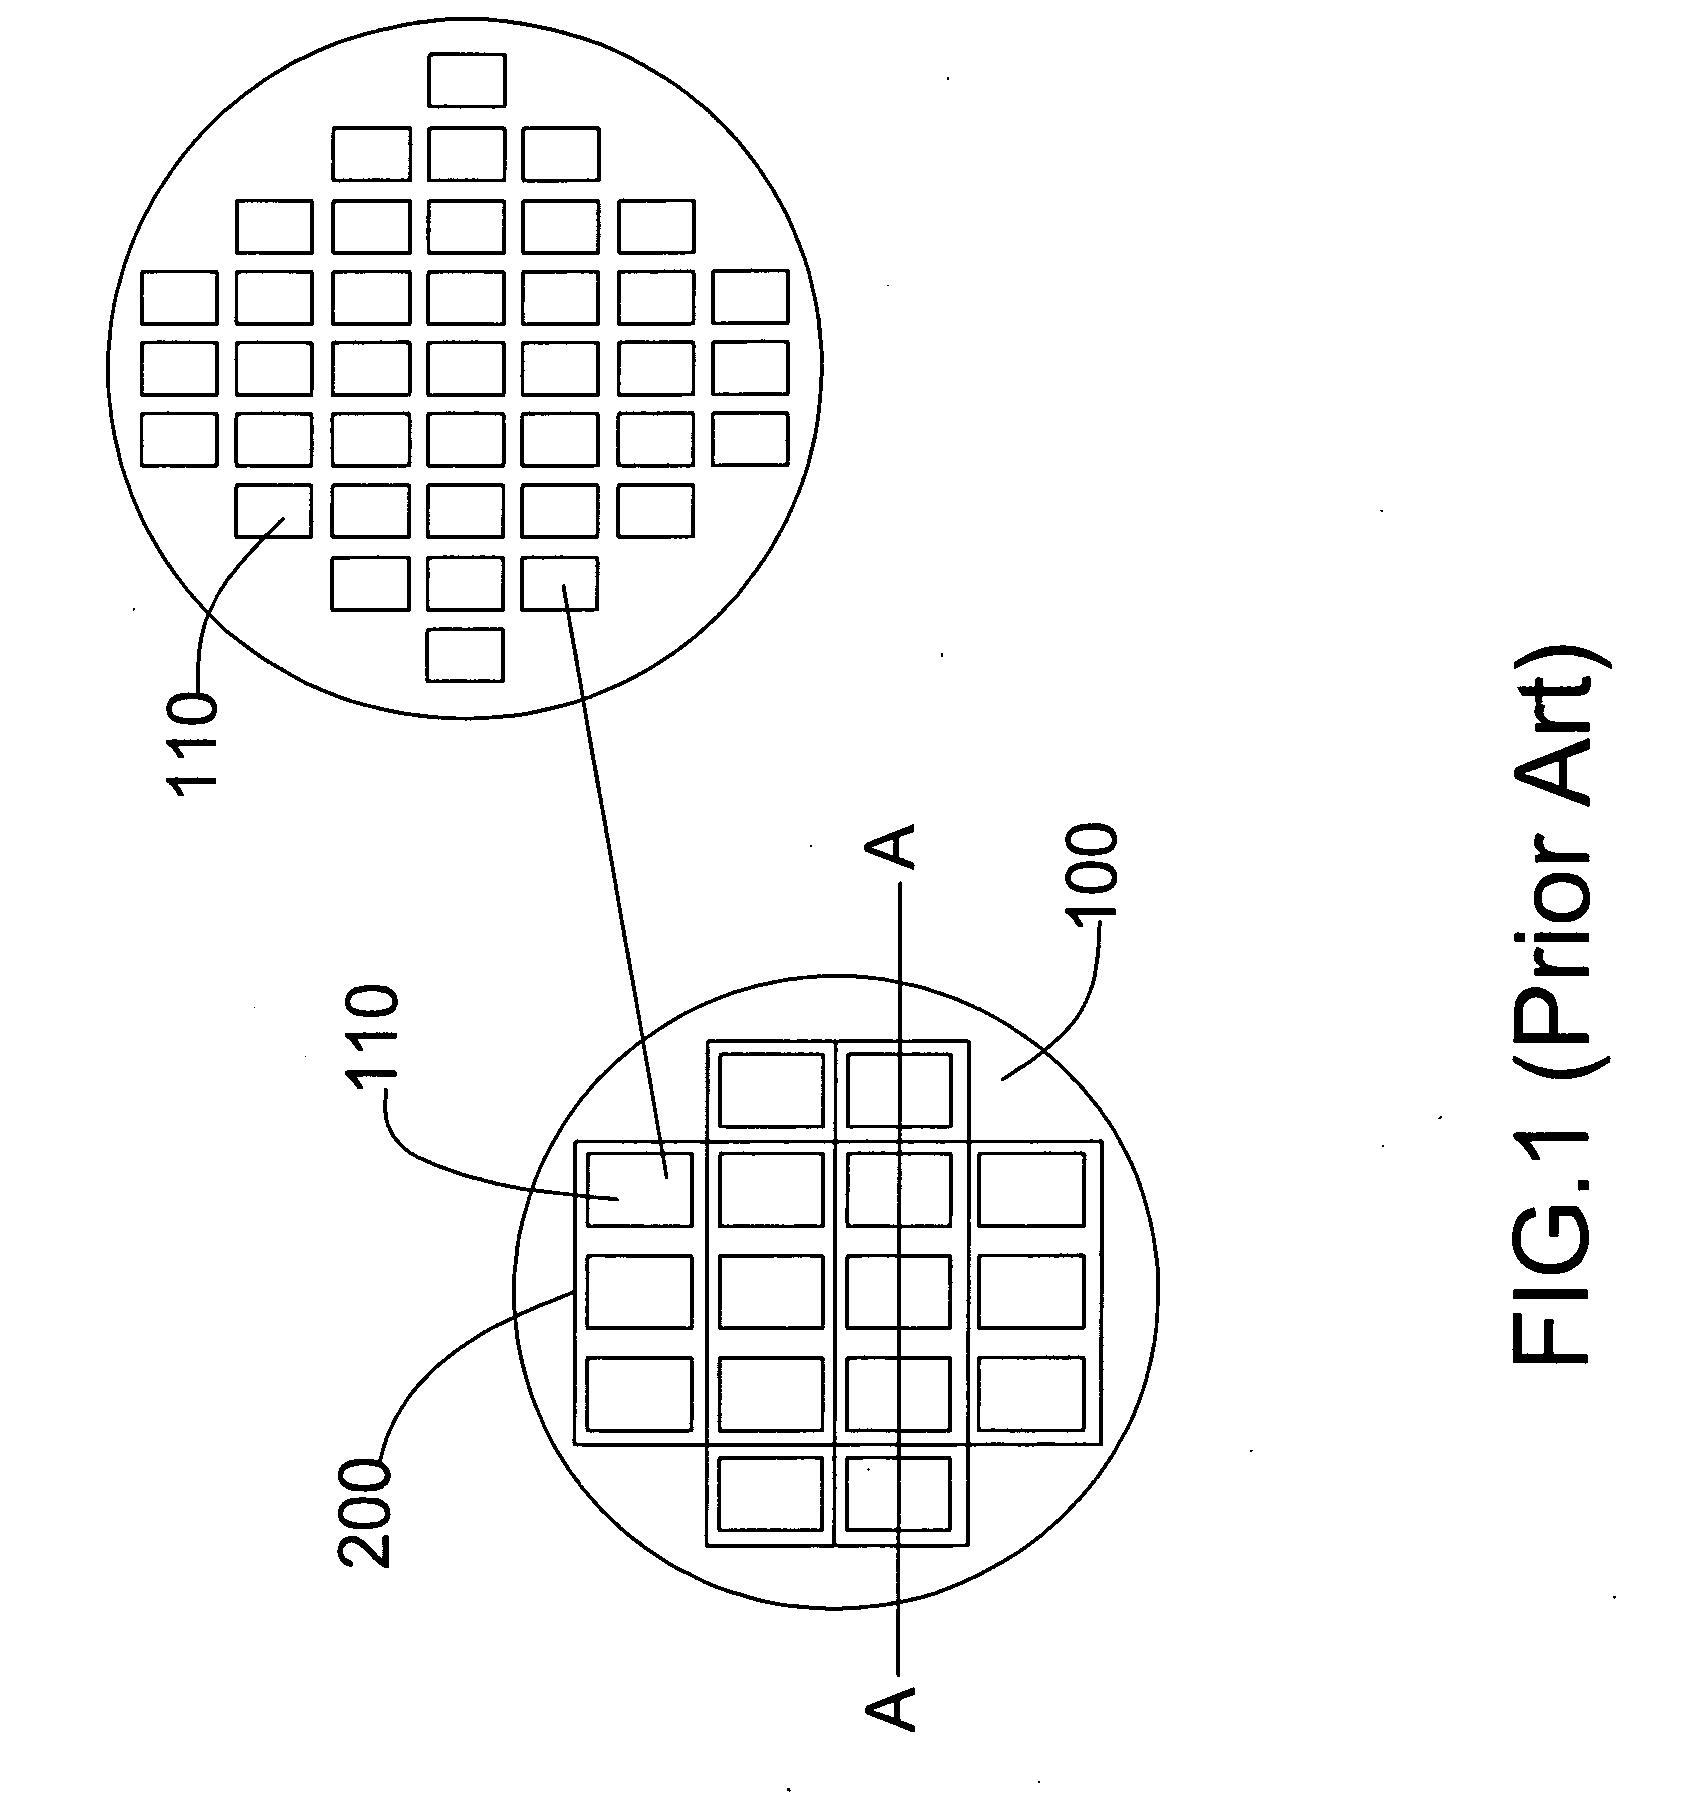 Dice Rearrangement Package Structure Using Layout Process to Form a Compliant Configuration